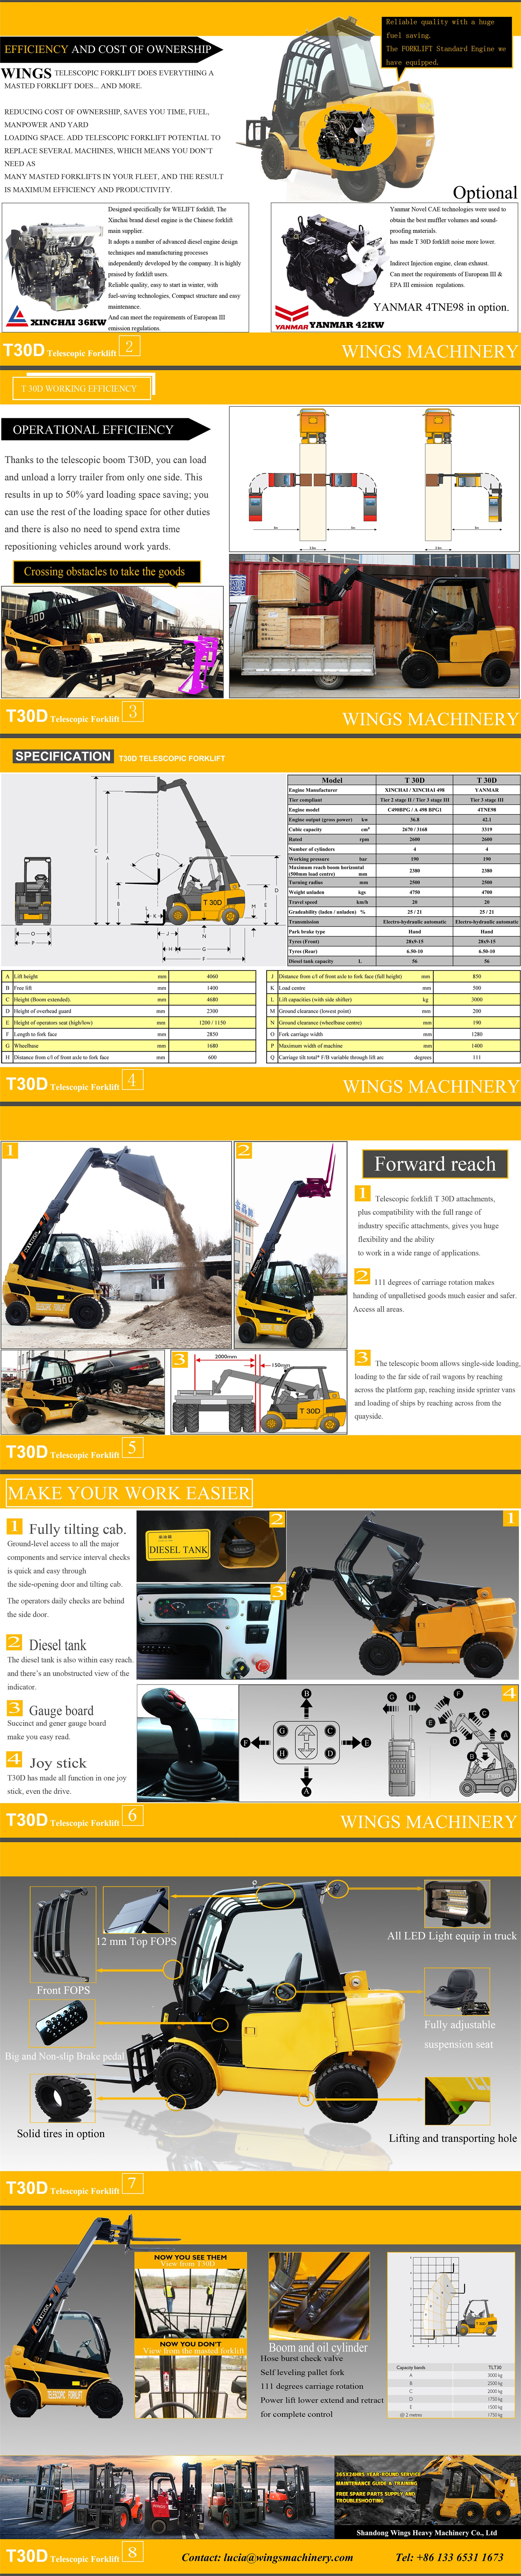 Specifications of Telescopic Forklift